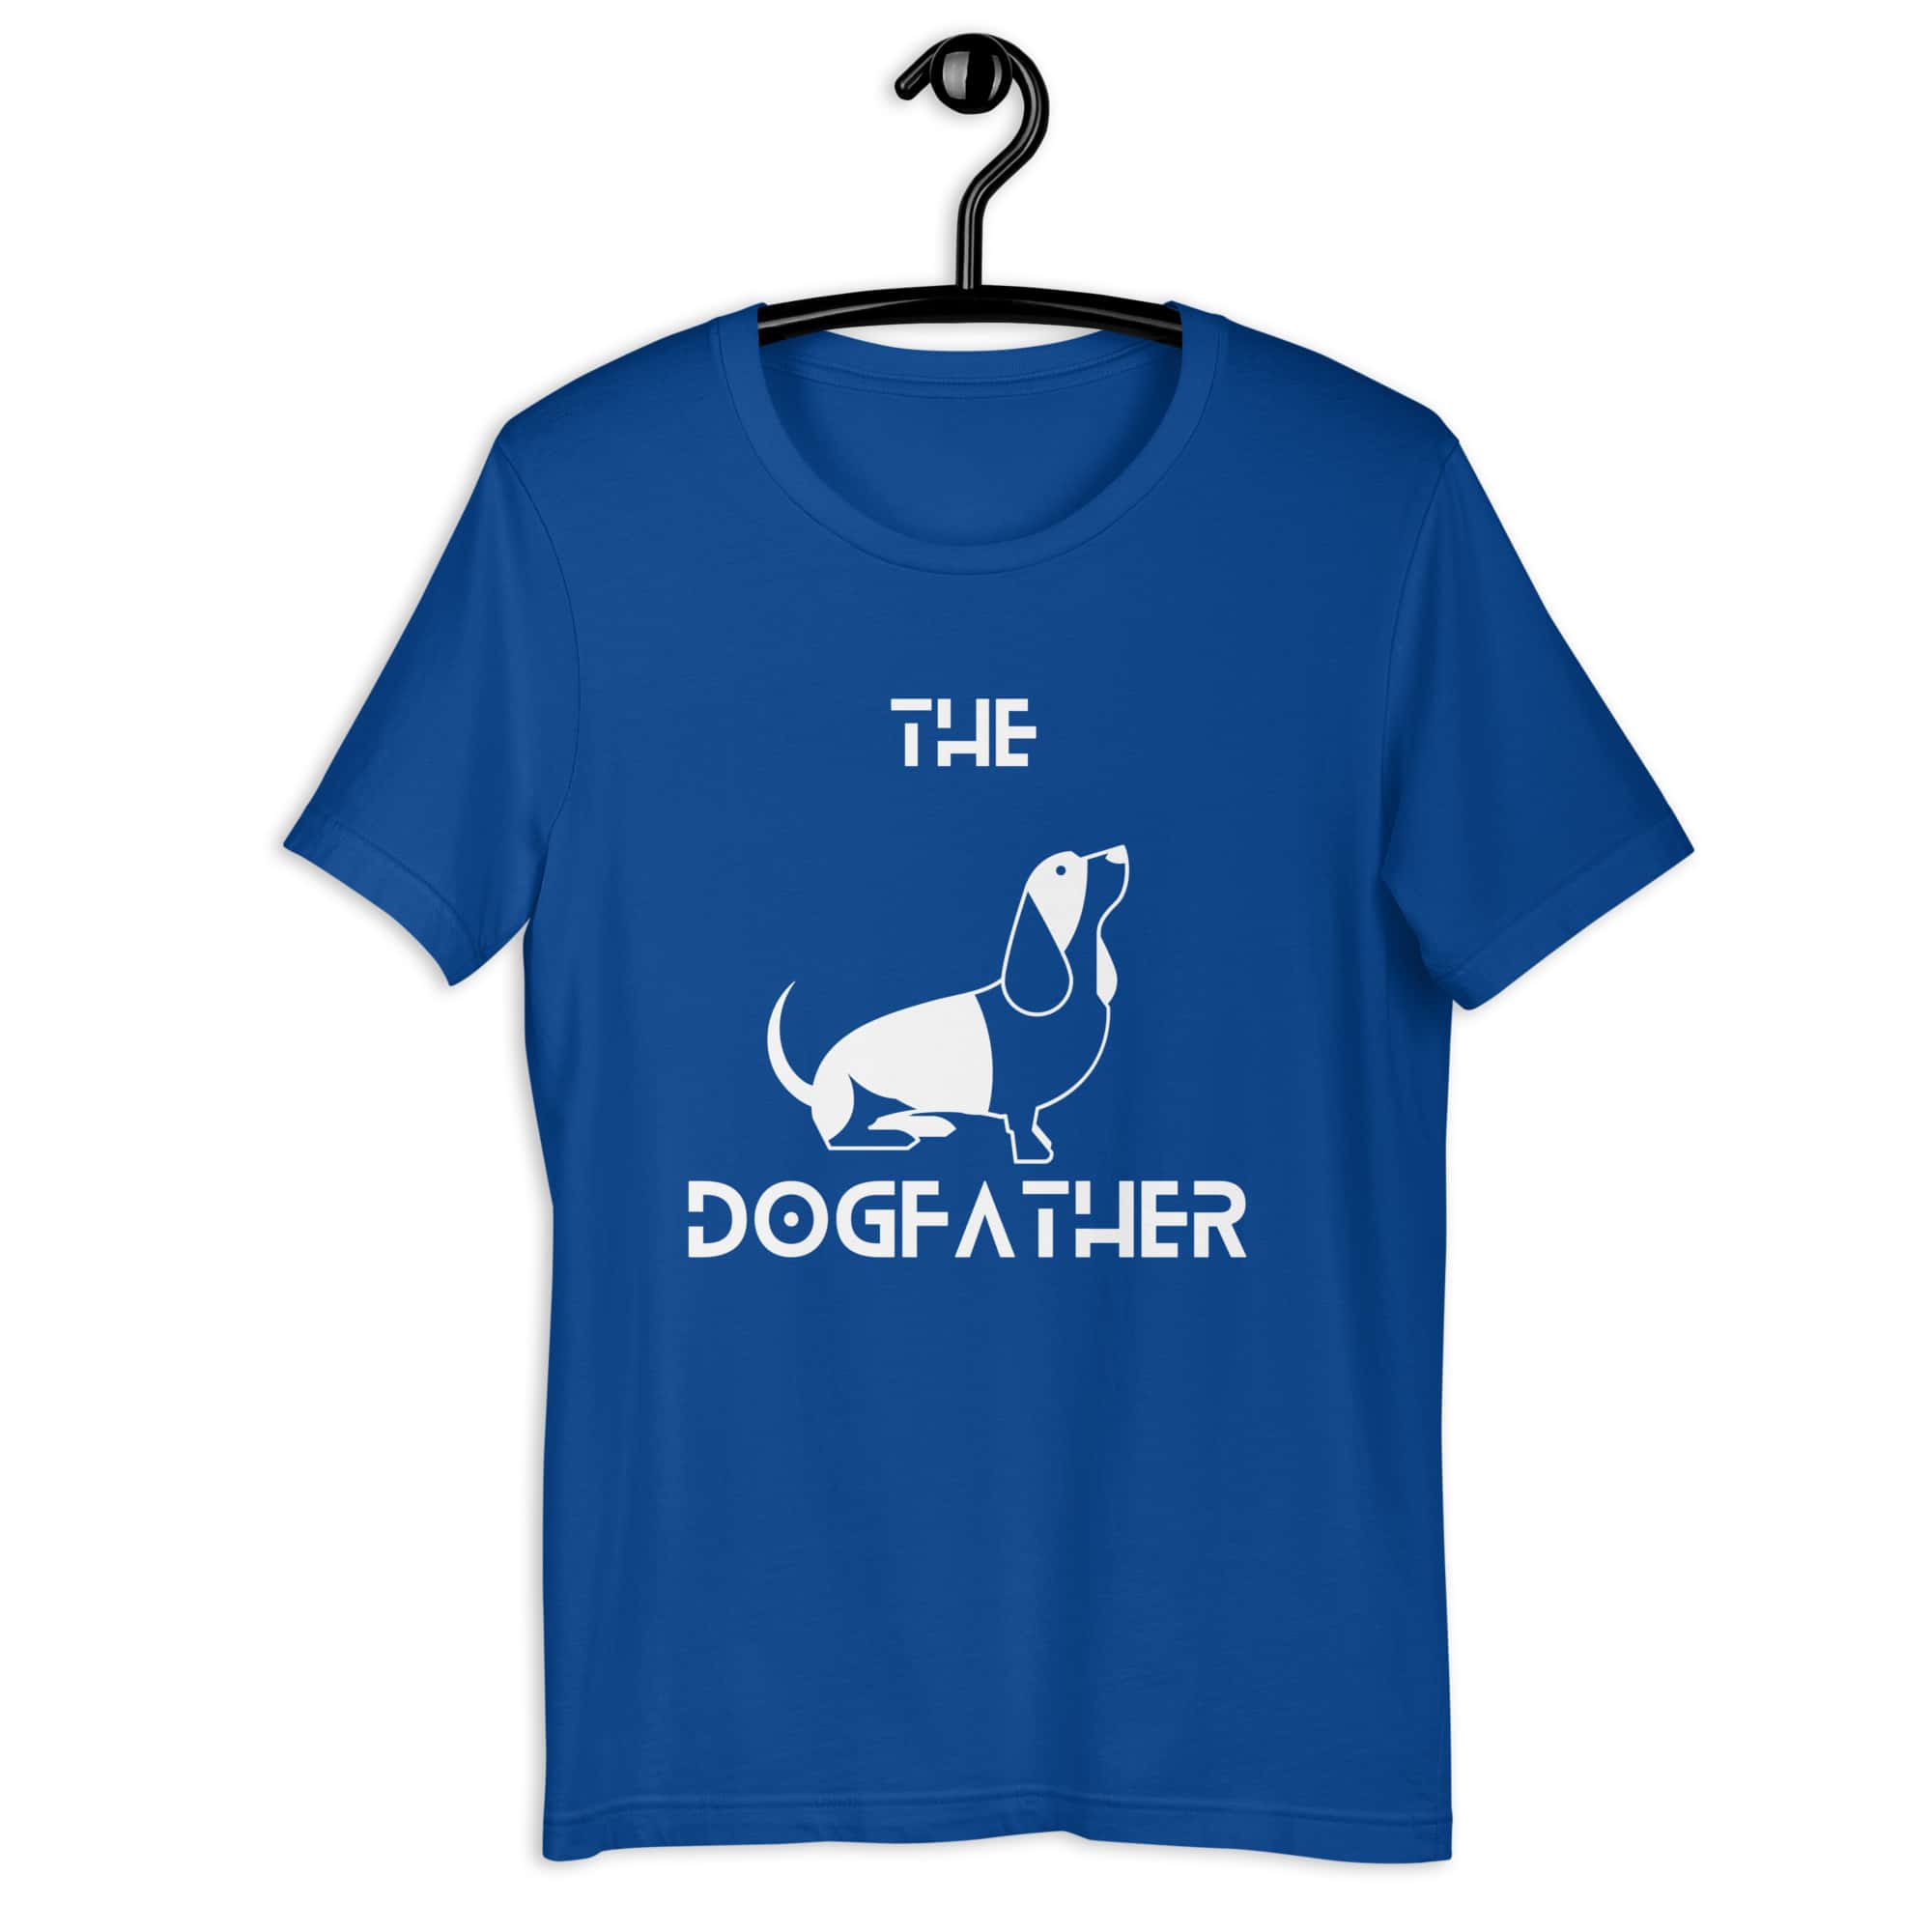 The Dogfather Hounds Unisex T-Shirt. Royal blue